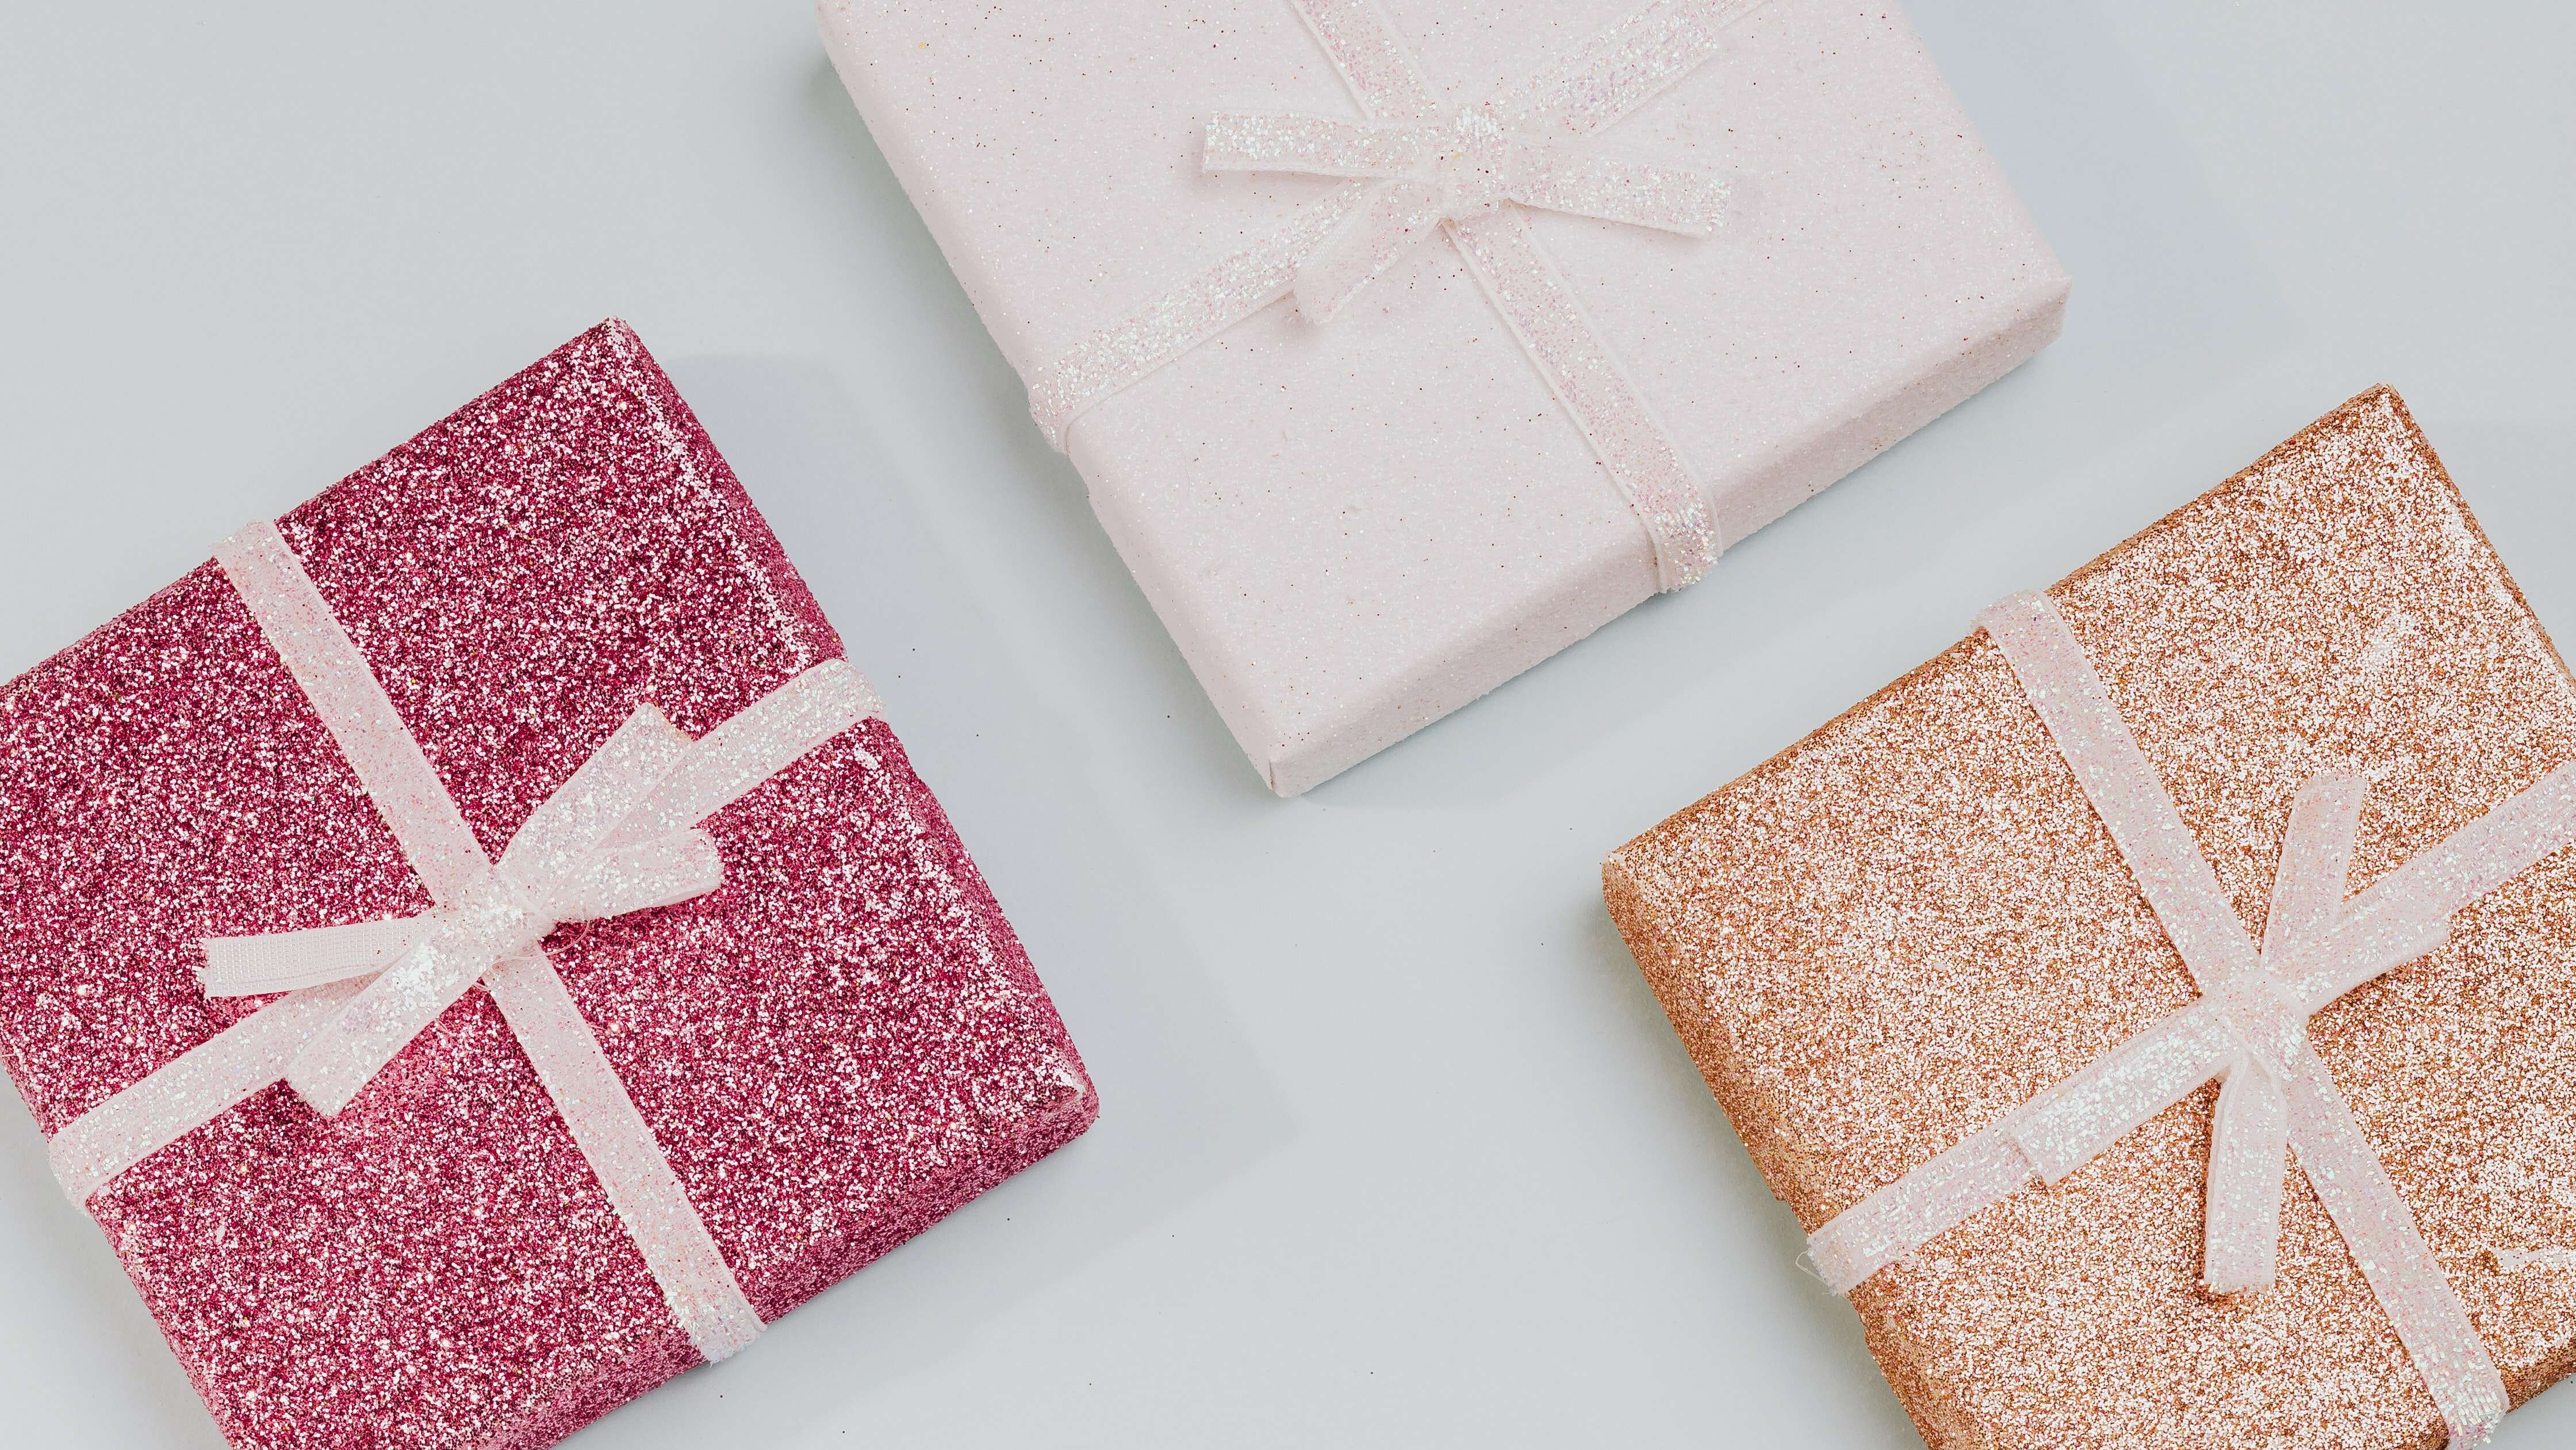 Gifts wrapped in bows